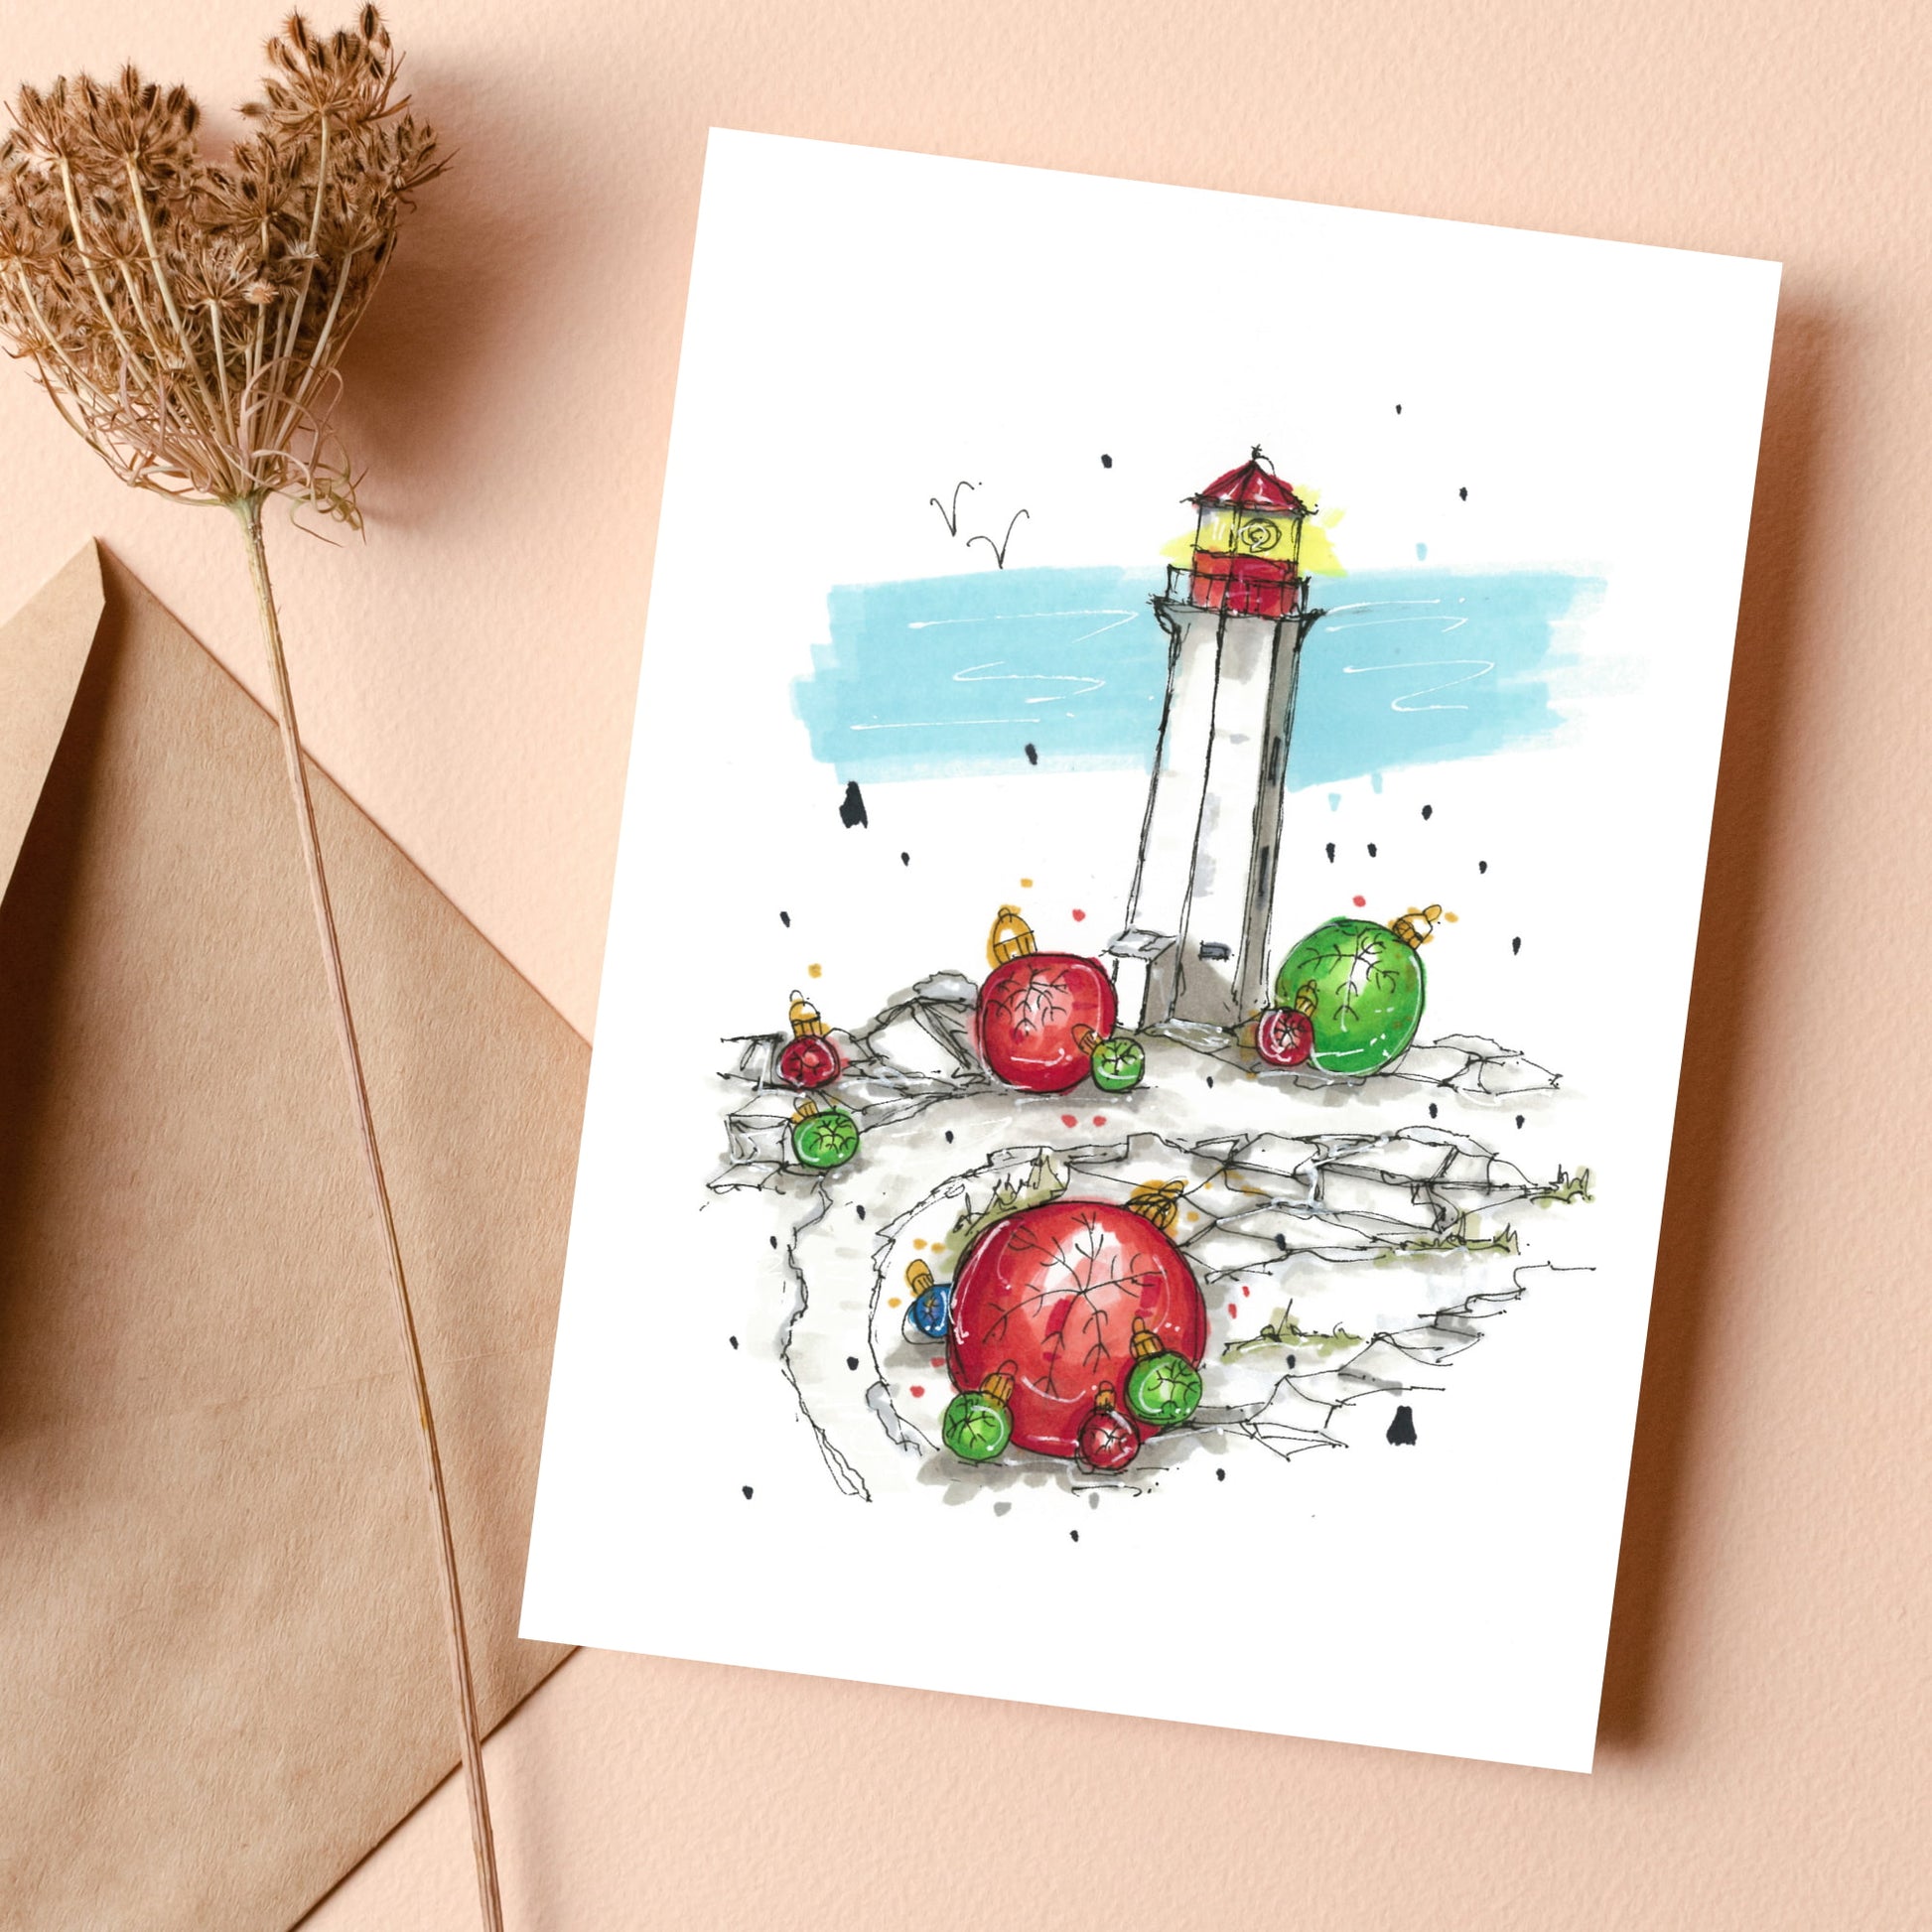 DTS0079 - Peggy's Cove Baubles, Greeting Card with Envelope, Downtown Sketcher, Wynand van Niekerk 